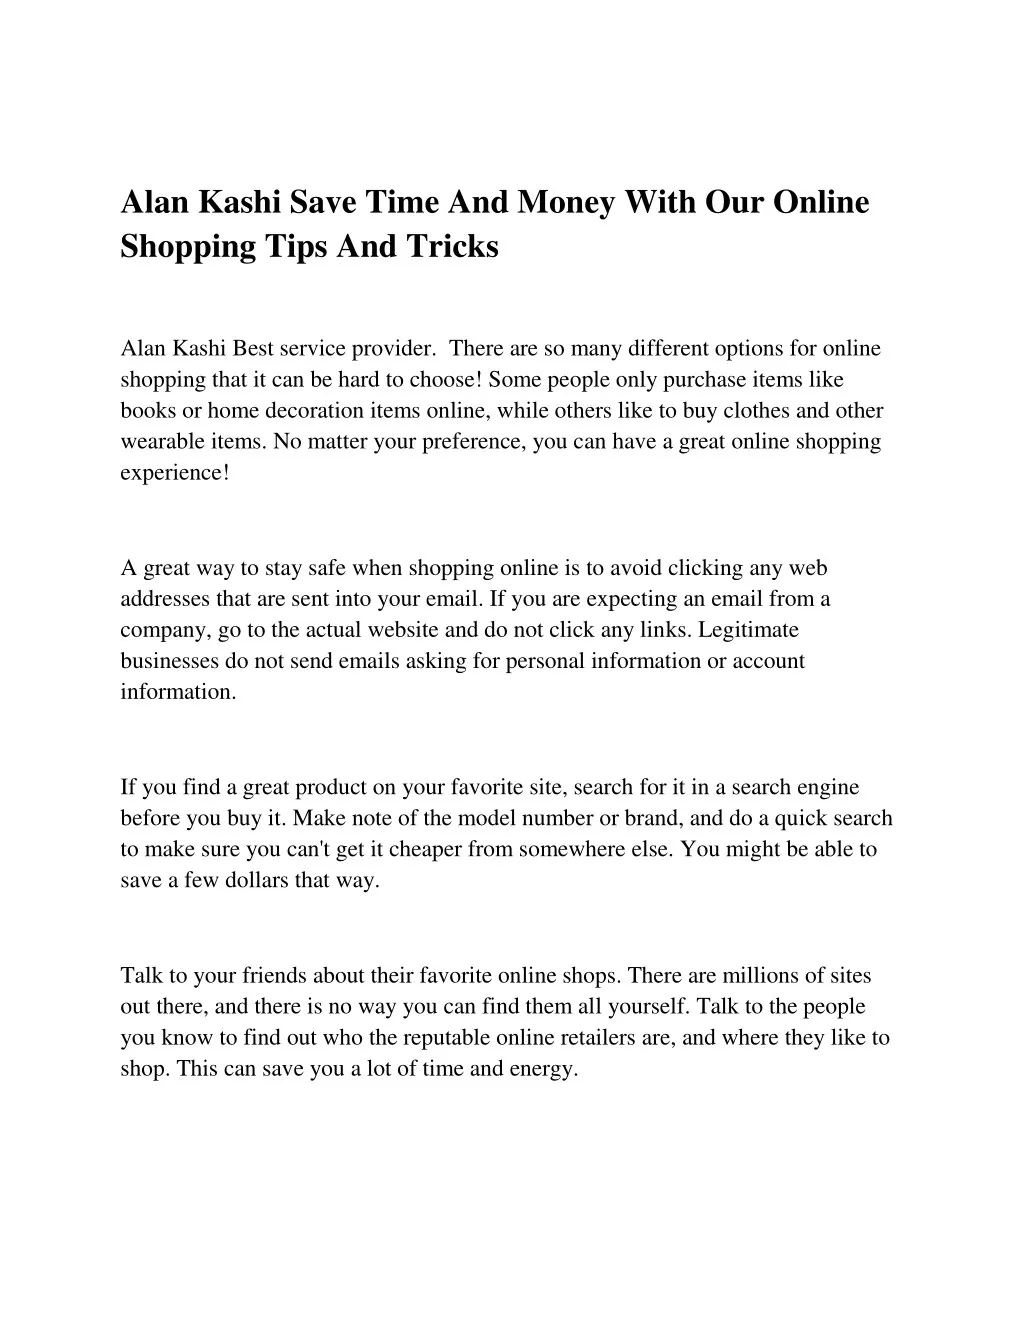 alan kashi save time and money with our online